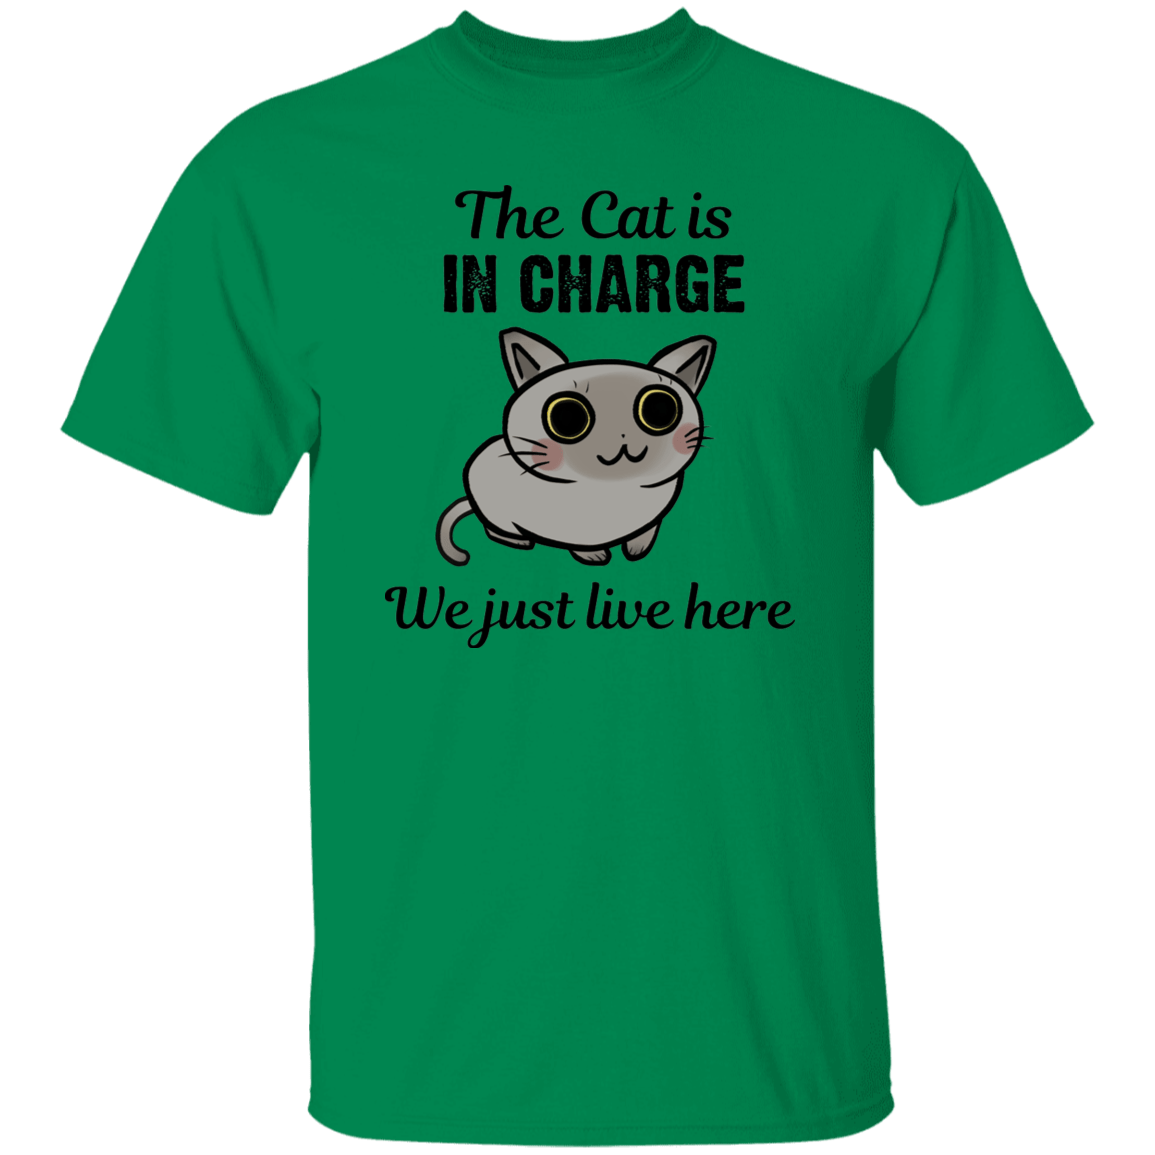 The Cat is in Charge - T-Shirt.